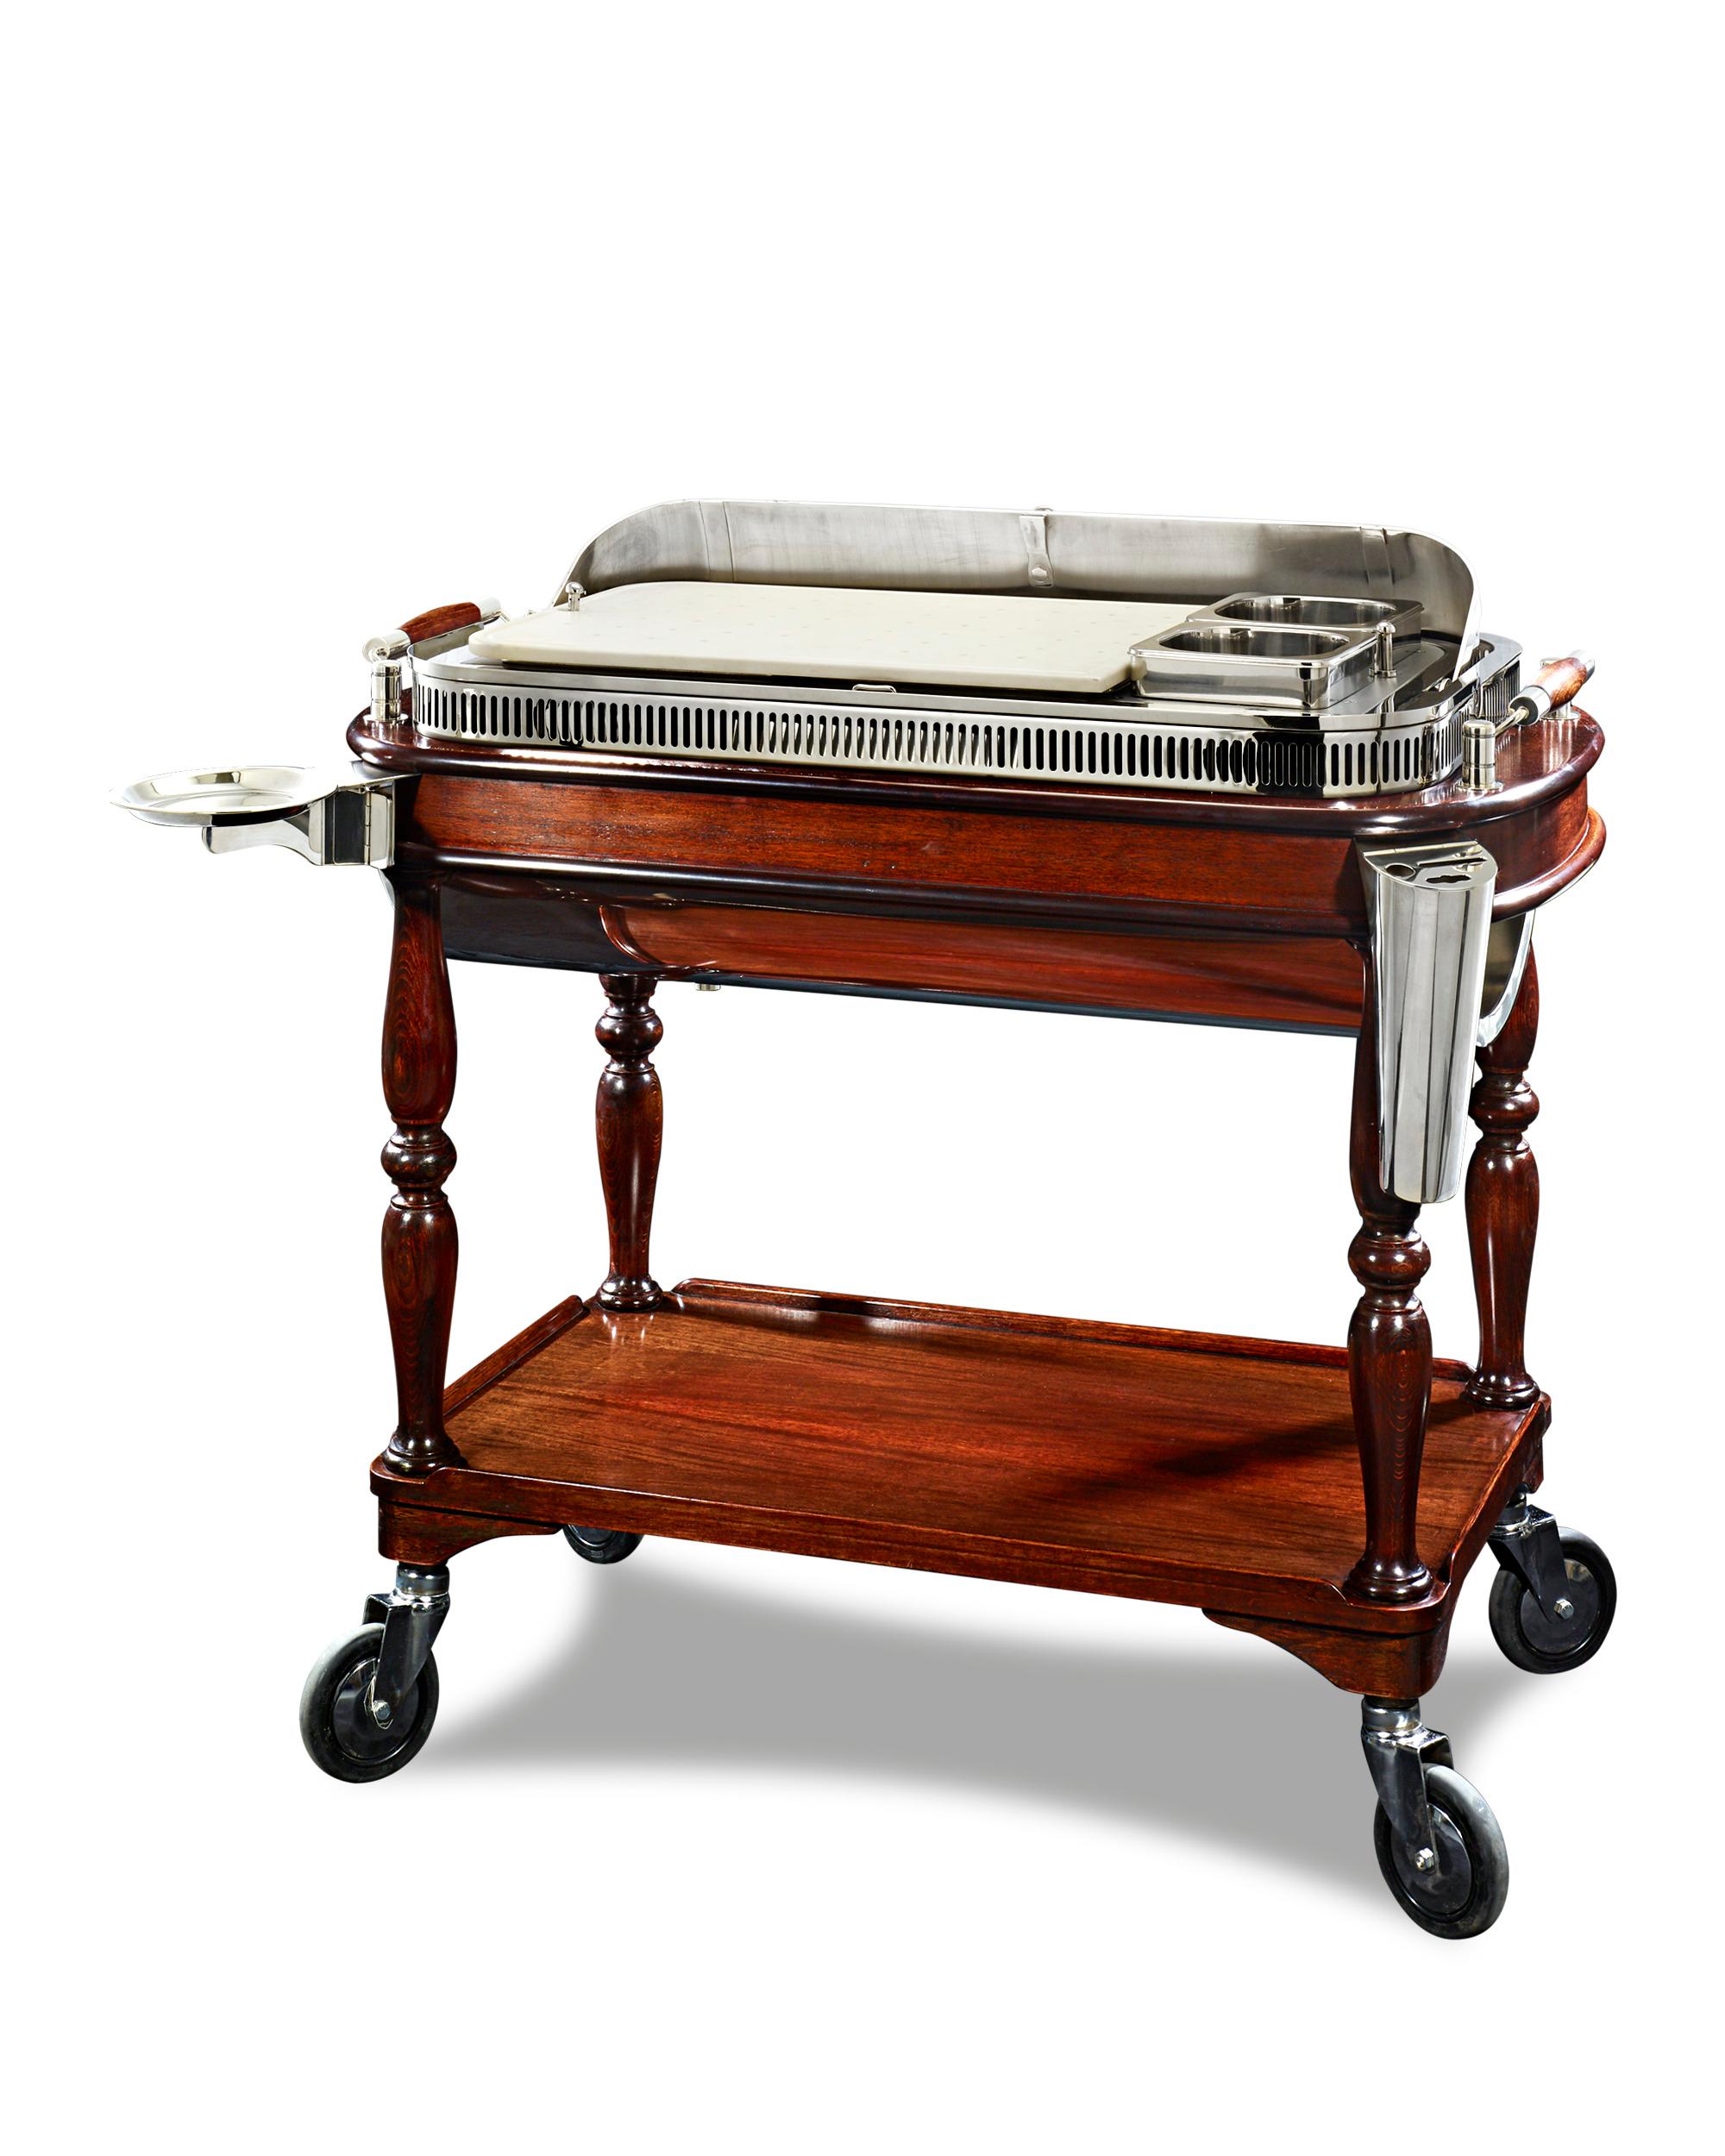 This extraordinary silver plate meat carving trolley was crafted by the prestigious firm Christofle & Cie. As a whole, the trolley makes an impressive display thanks to its large, elegant form resting upon a wheeled mahogany base. Raise the lid of